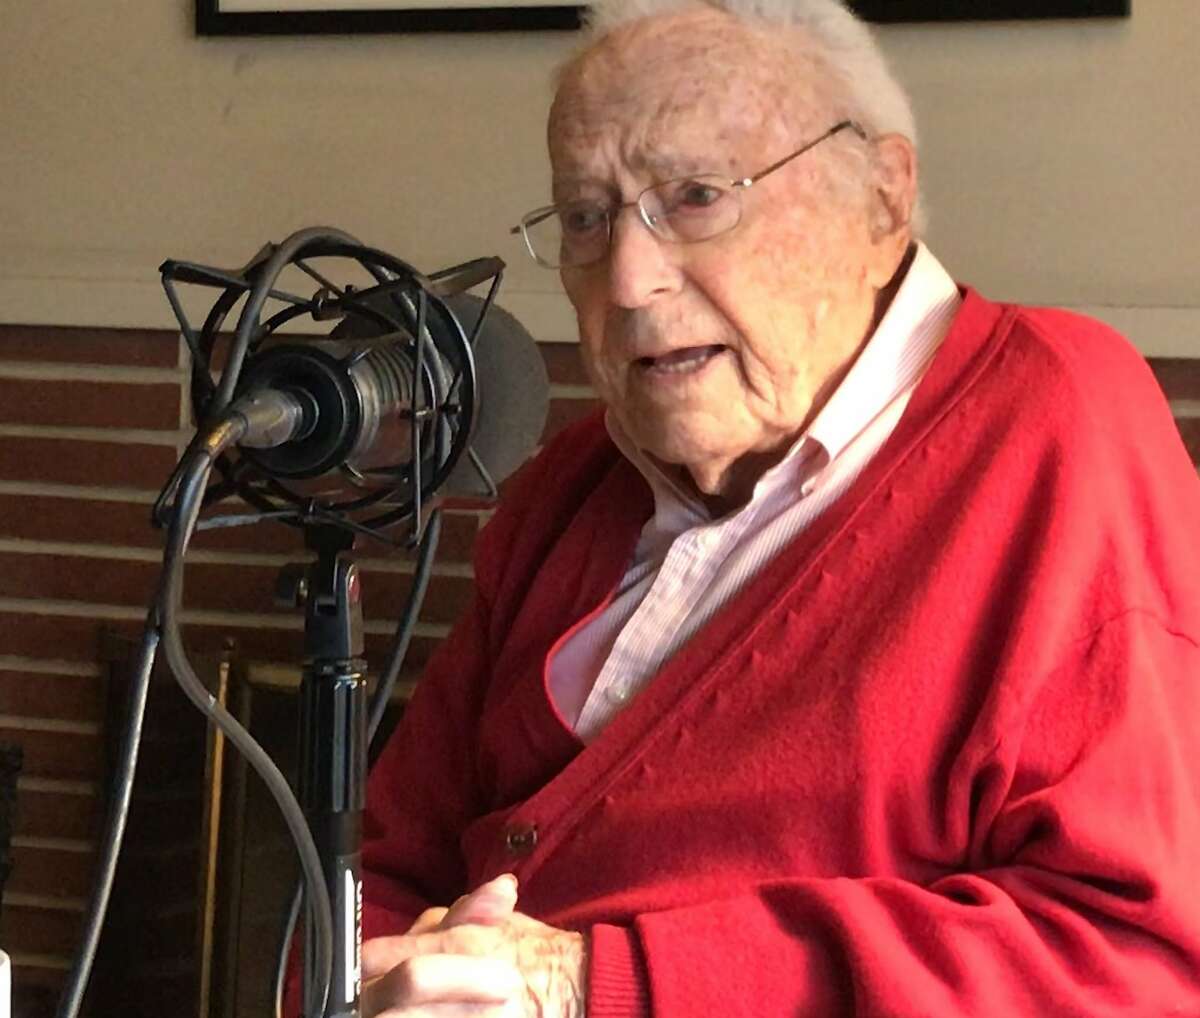 David Perlman at his San Francisco home on Jan. 14, 2019, while appearing on The San Francisco Chronicle's "The Big Event" podcast. Perlman worked for The Chronicle beginning in 1940 and retired in 2017.